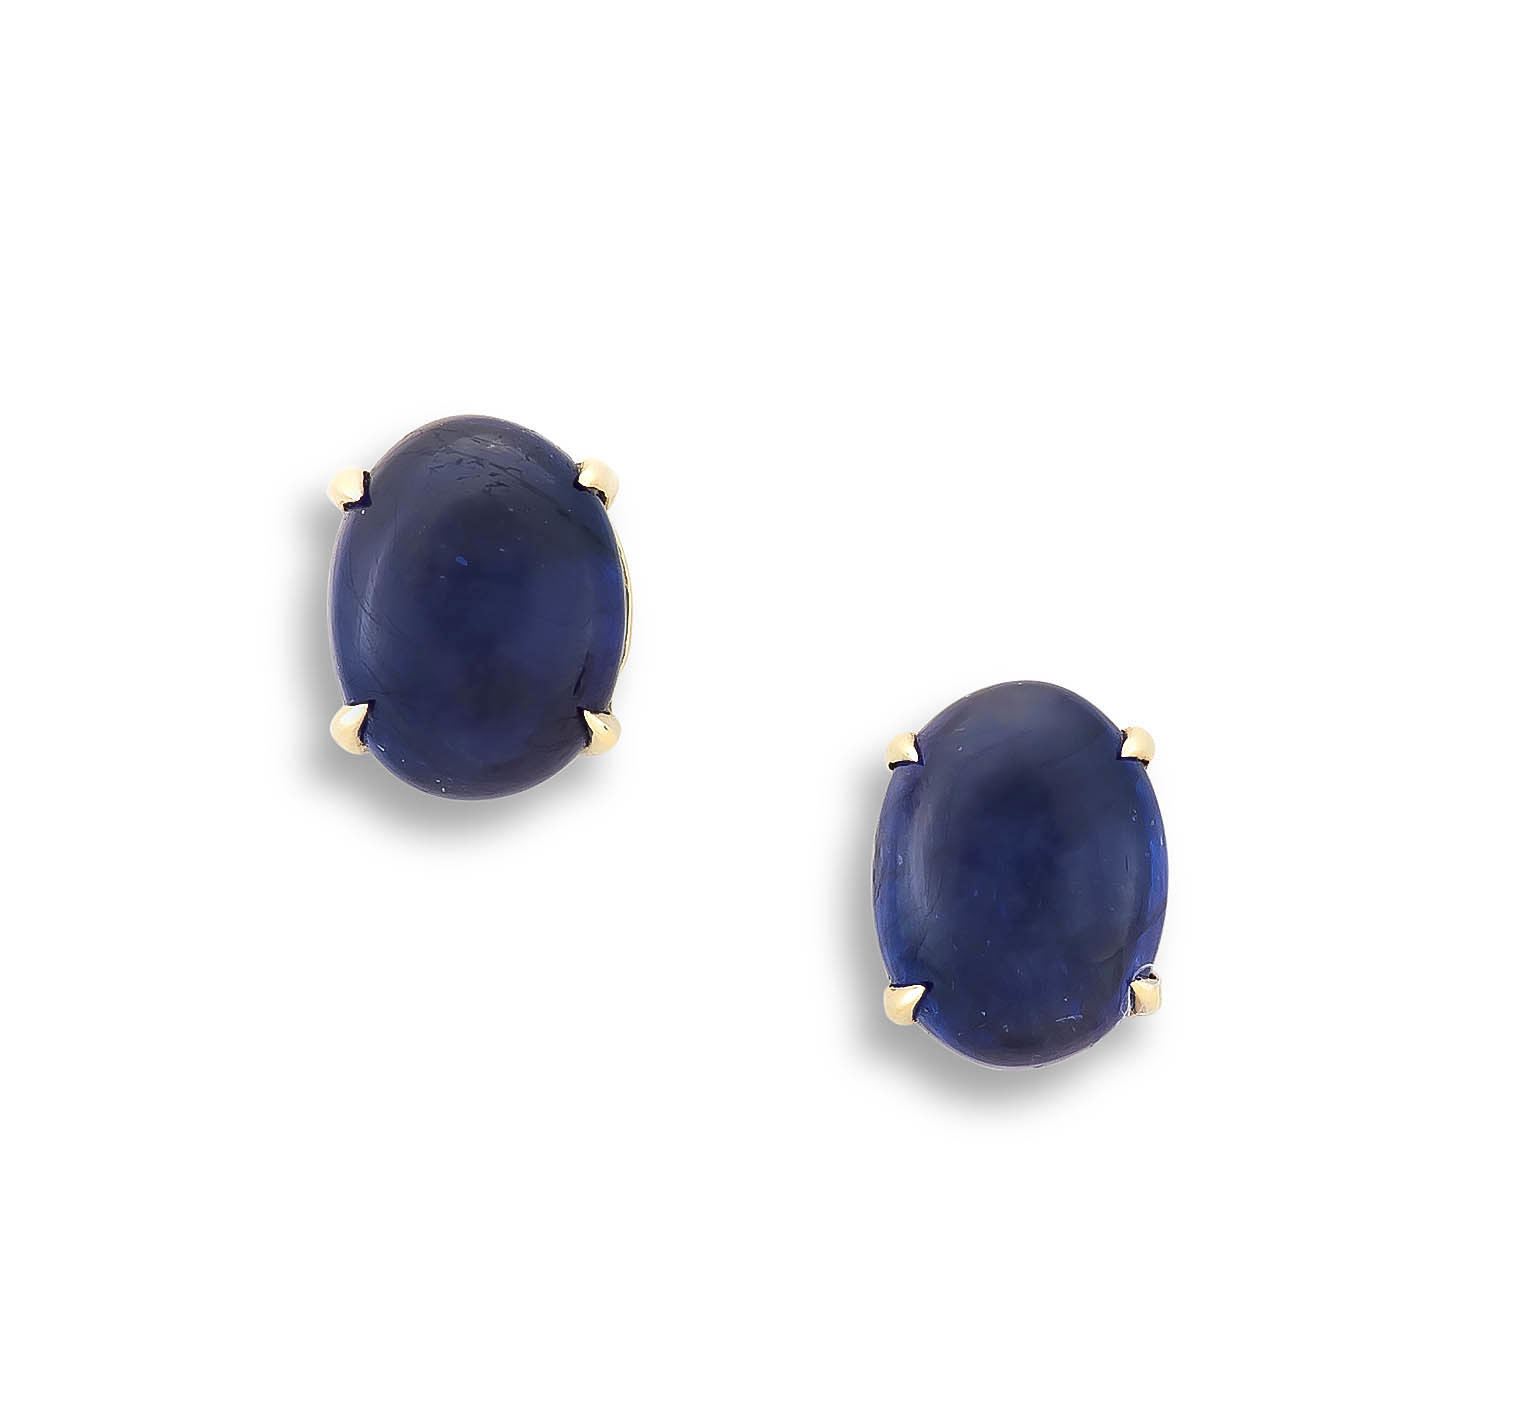 Pair of blue sapphire and gold earrings